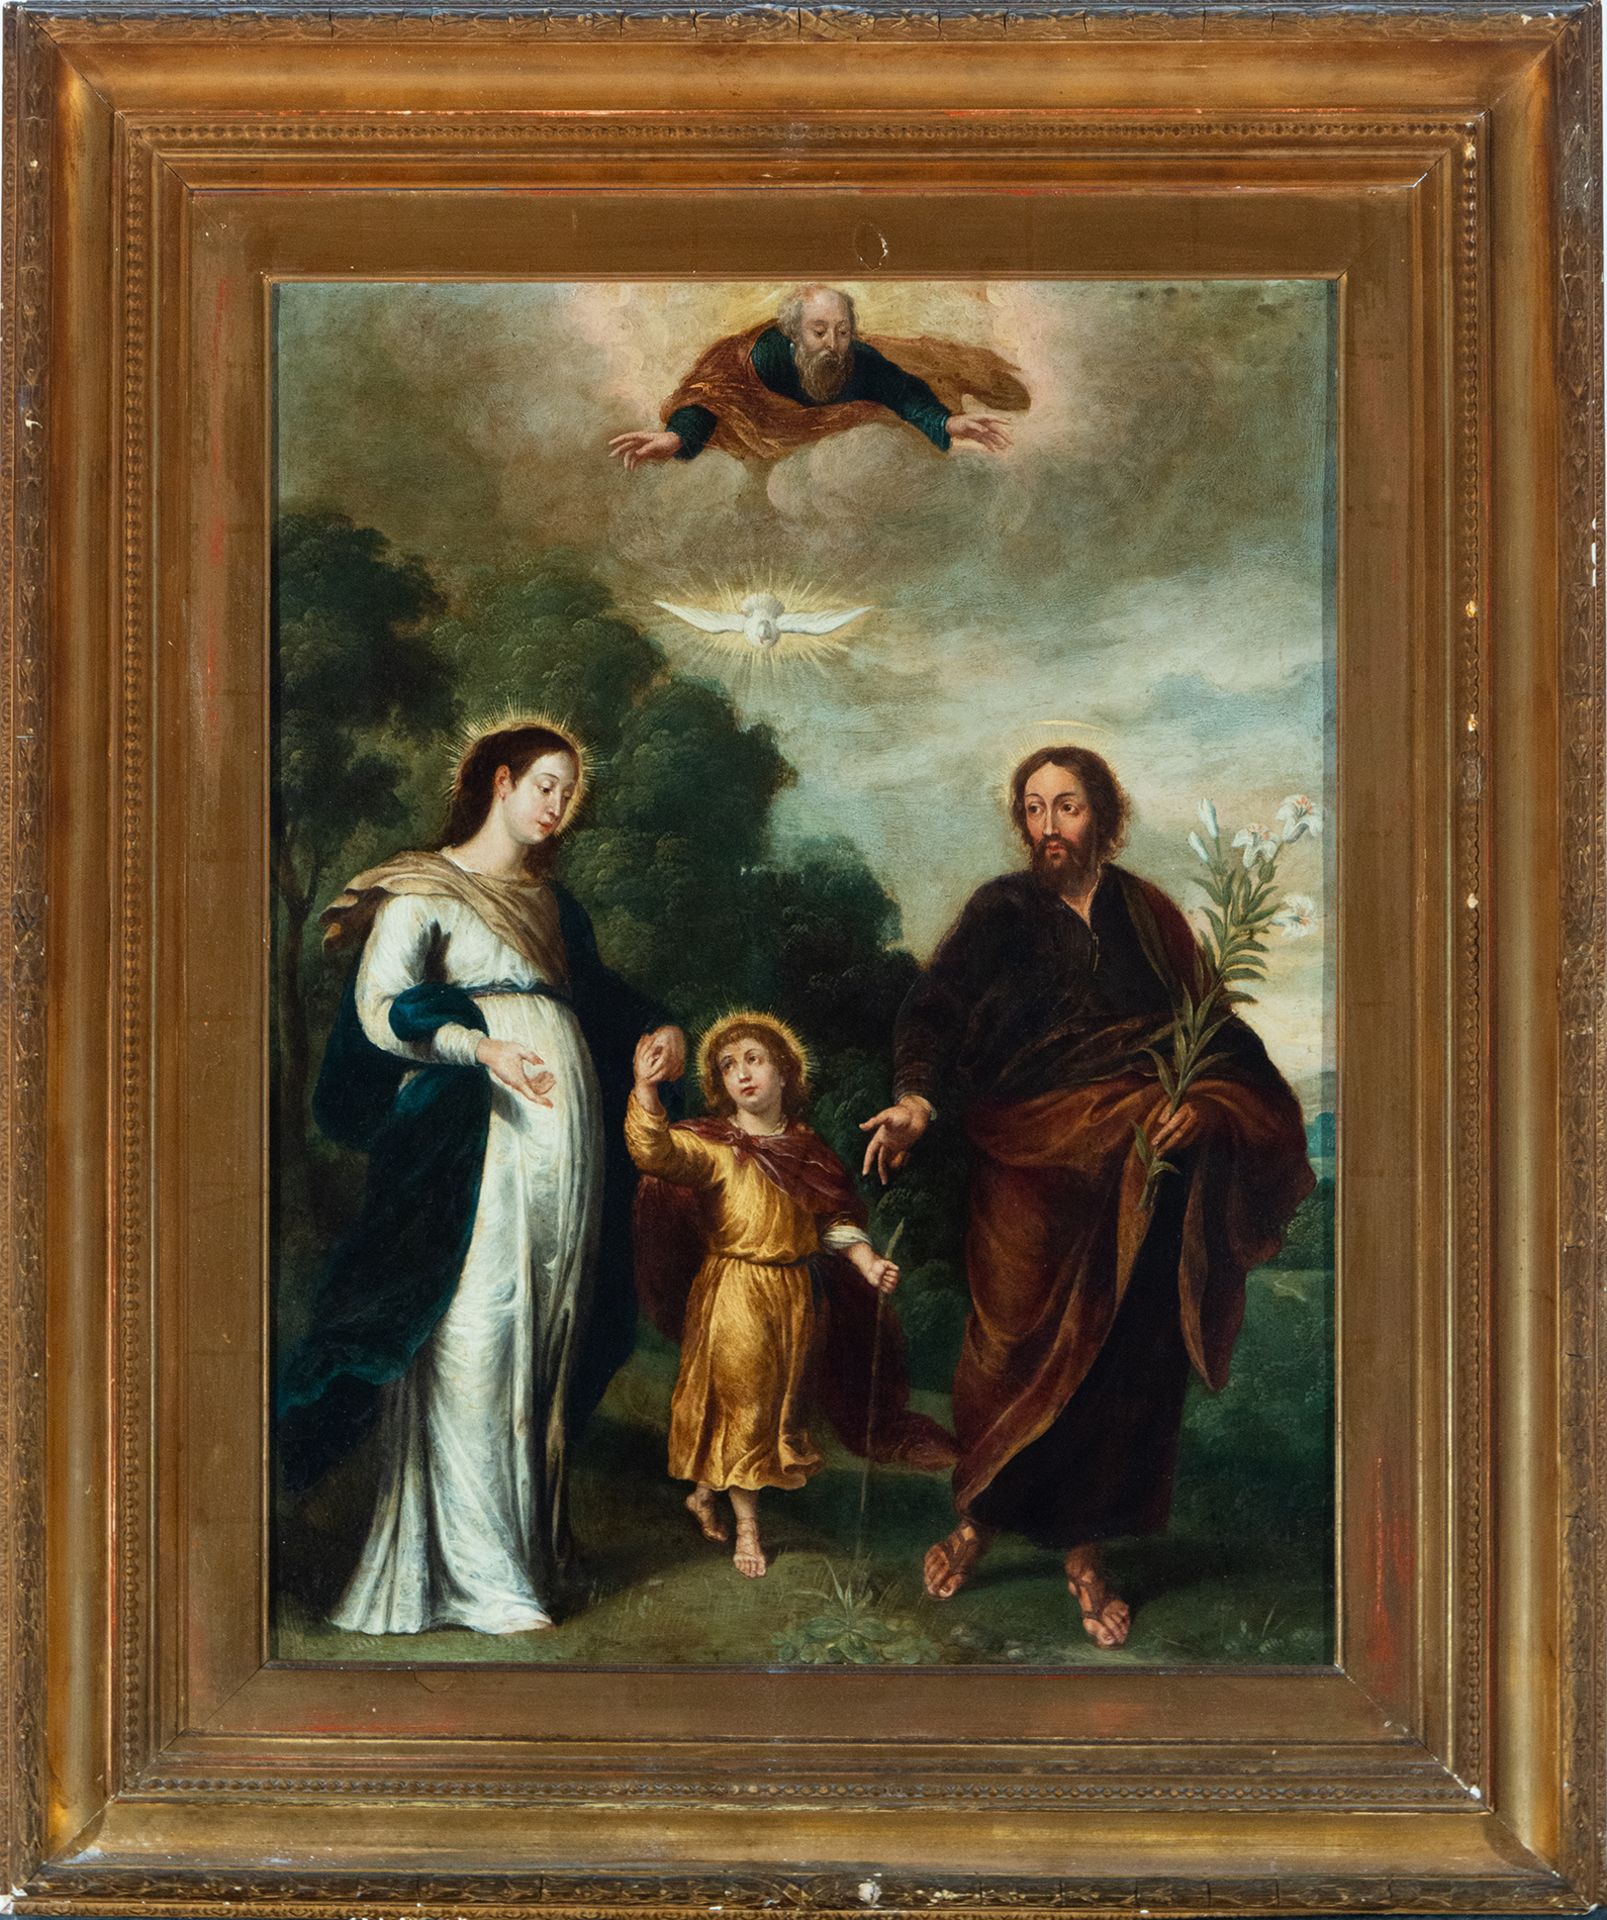 The Holy Family, large oil on copper, 17th century Flemish school